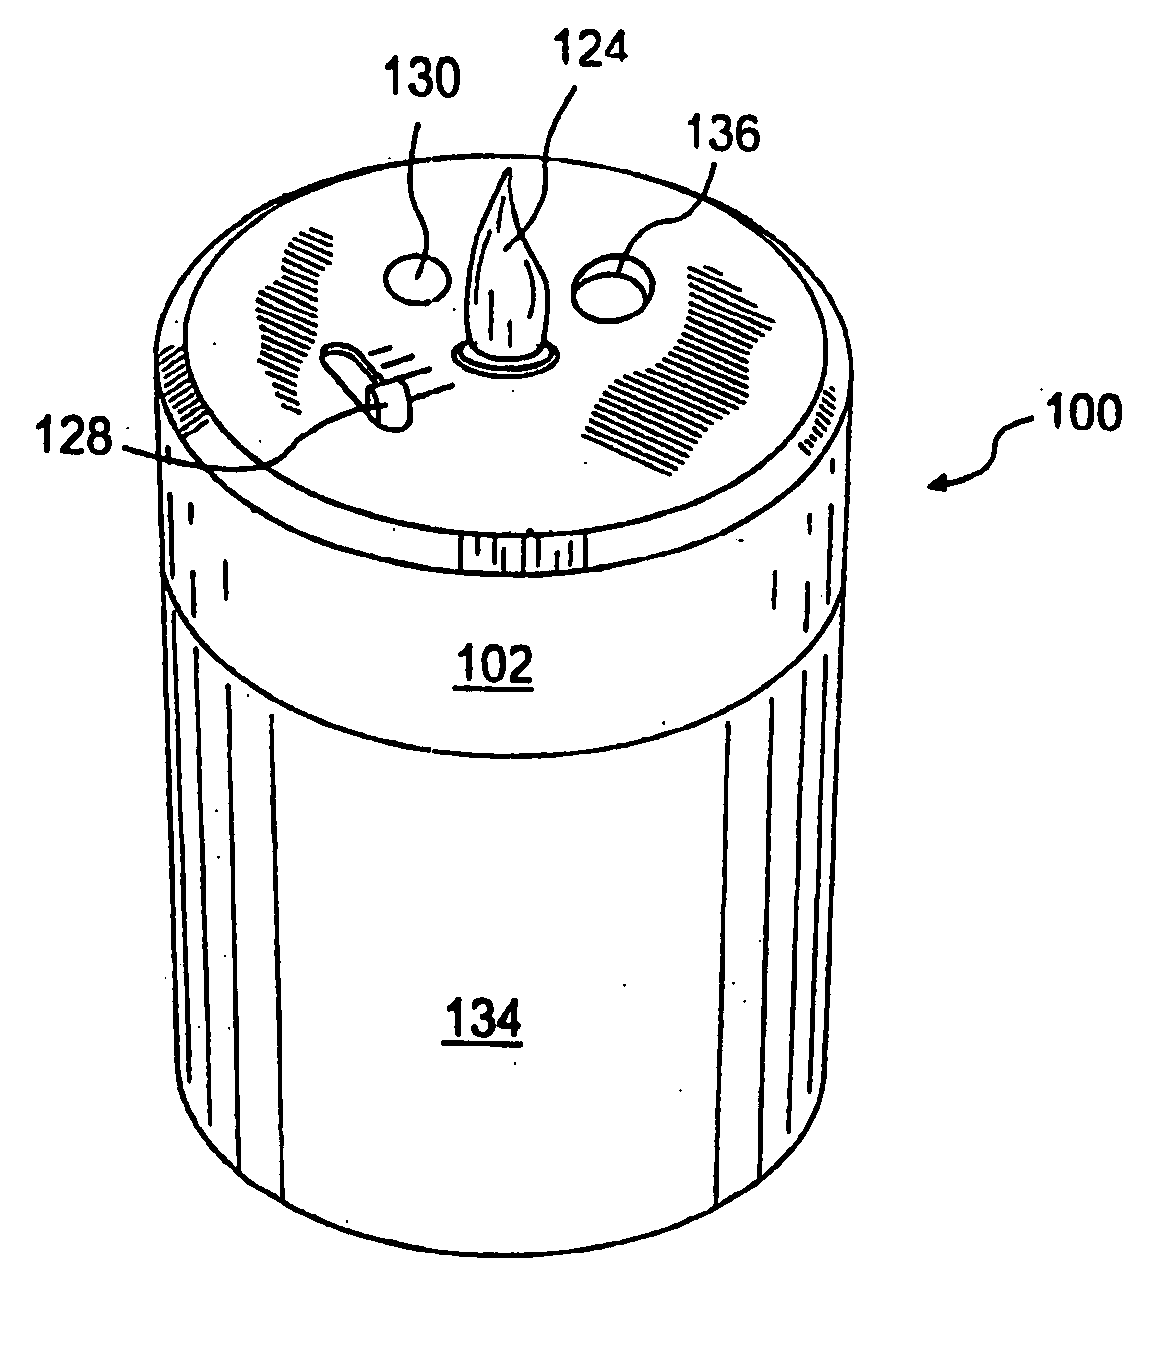 Control and an integrated circuit for a multisensory apparatus